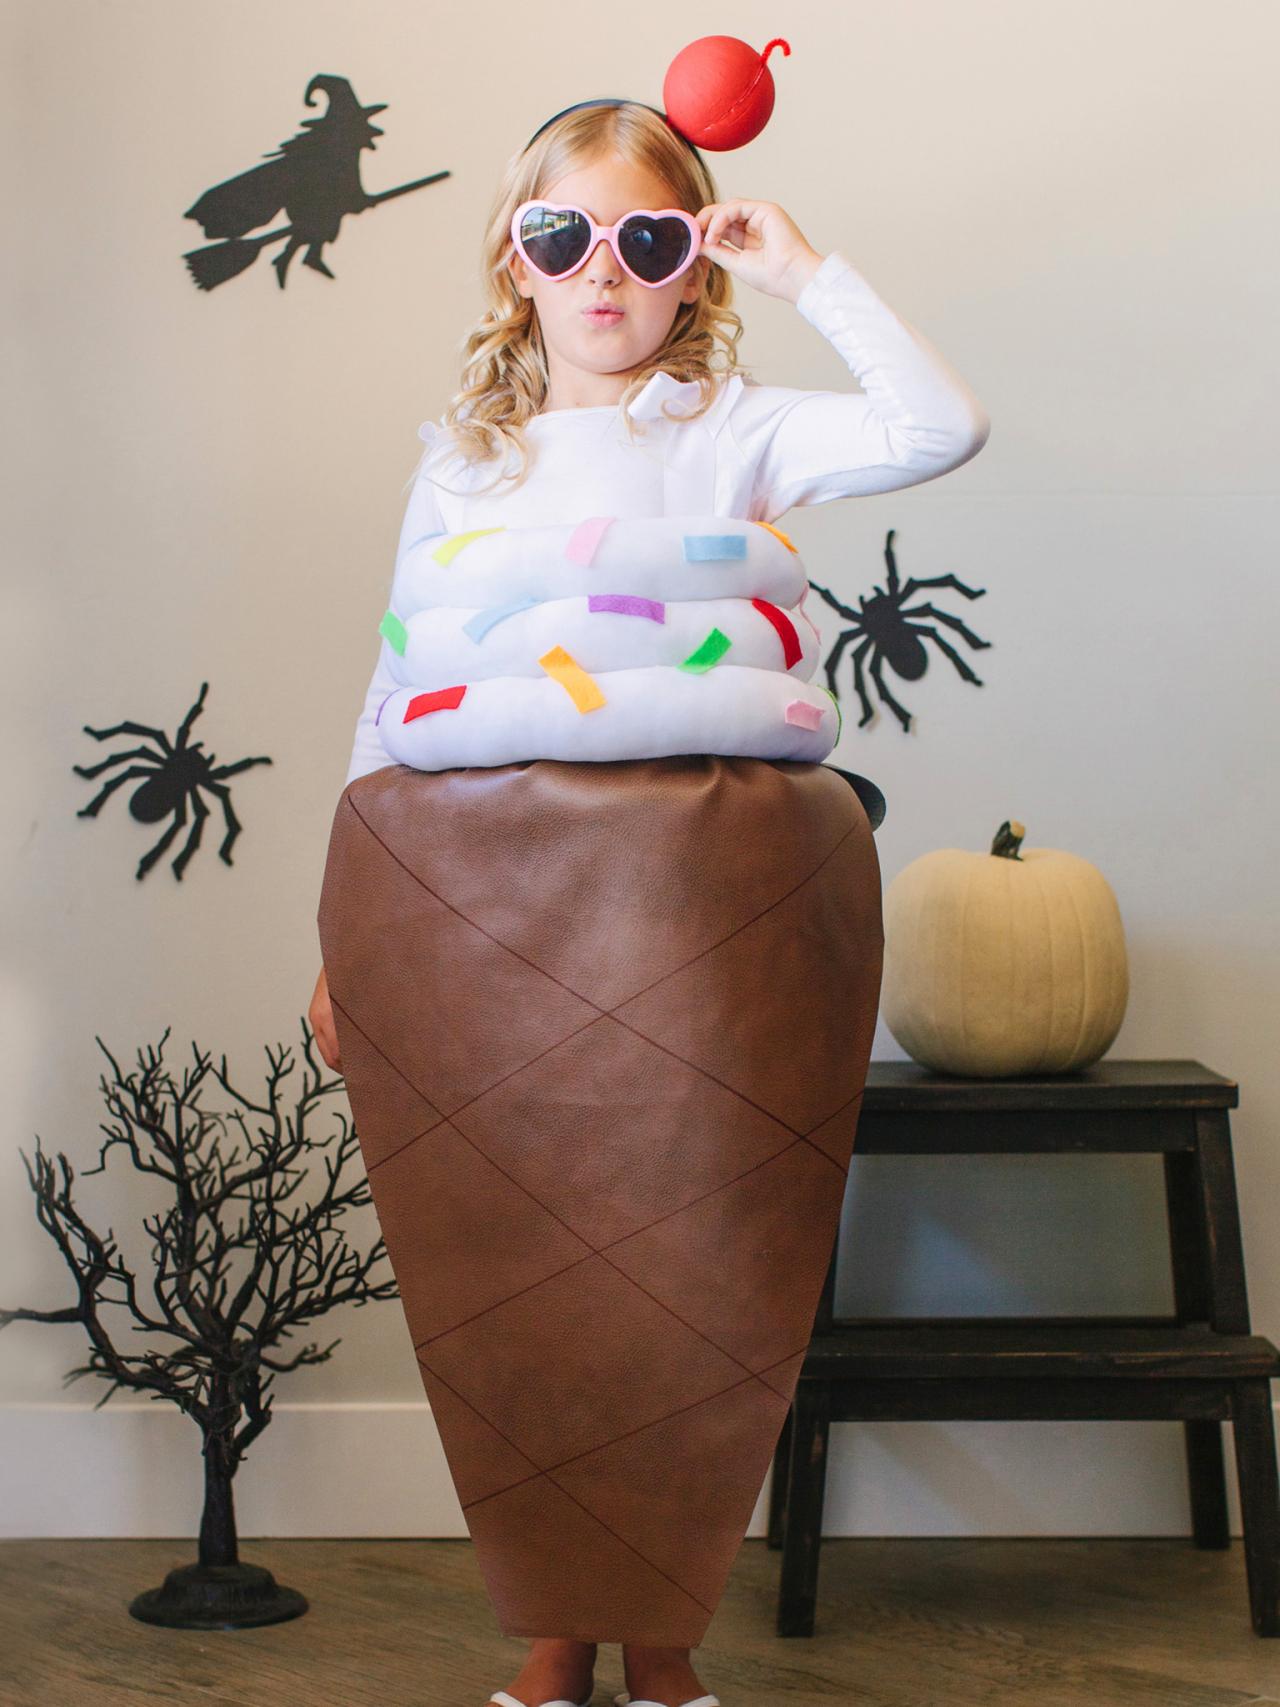 Details about Adult Ice Cream Cone Halloween Costume. 